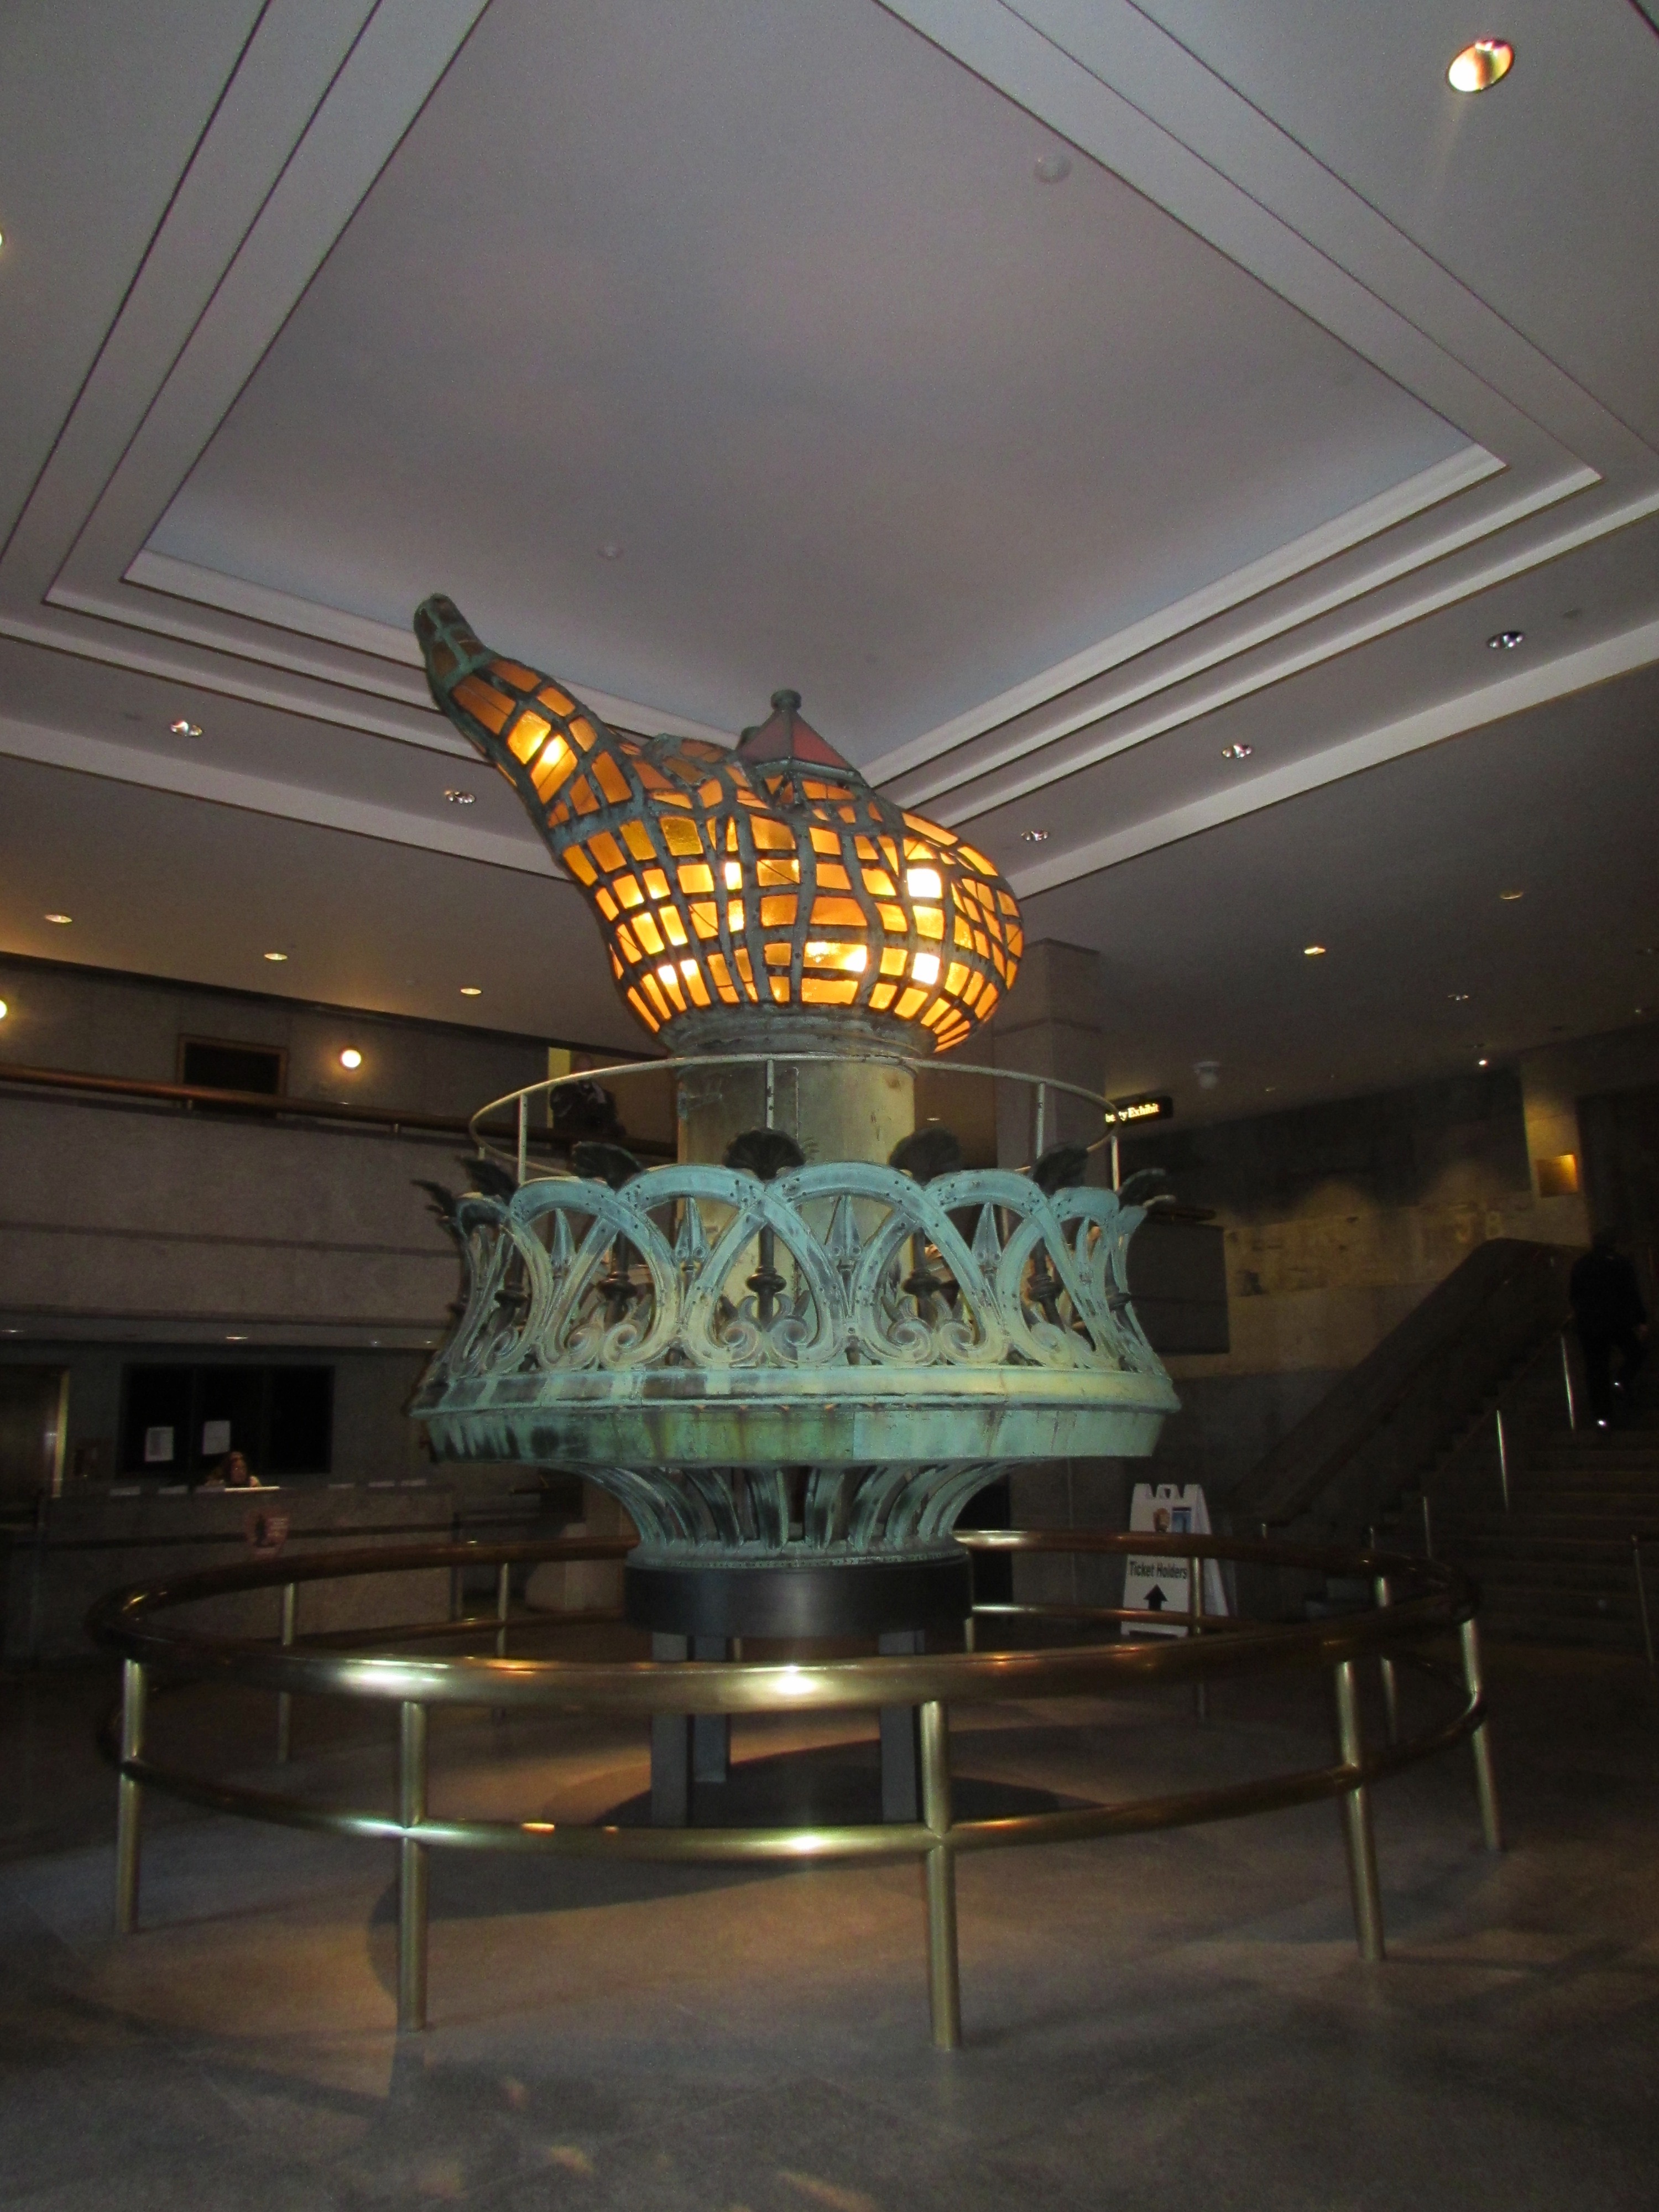 The original torch on display in the pedestal of Statue of Liberty, New York